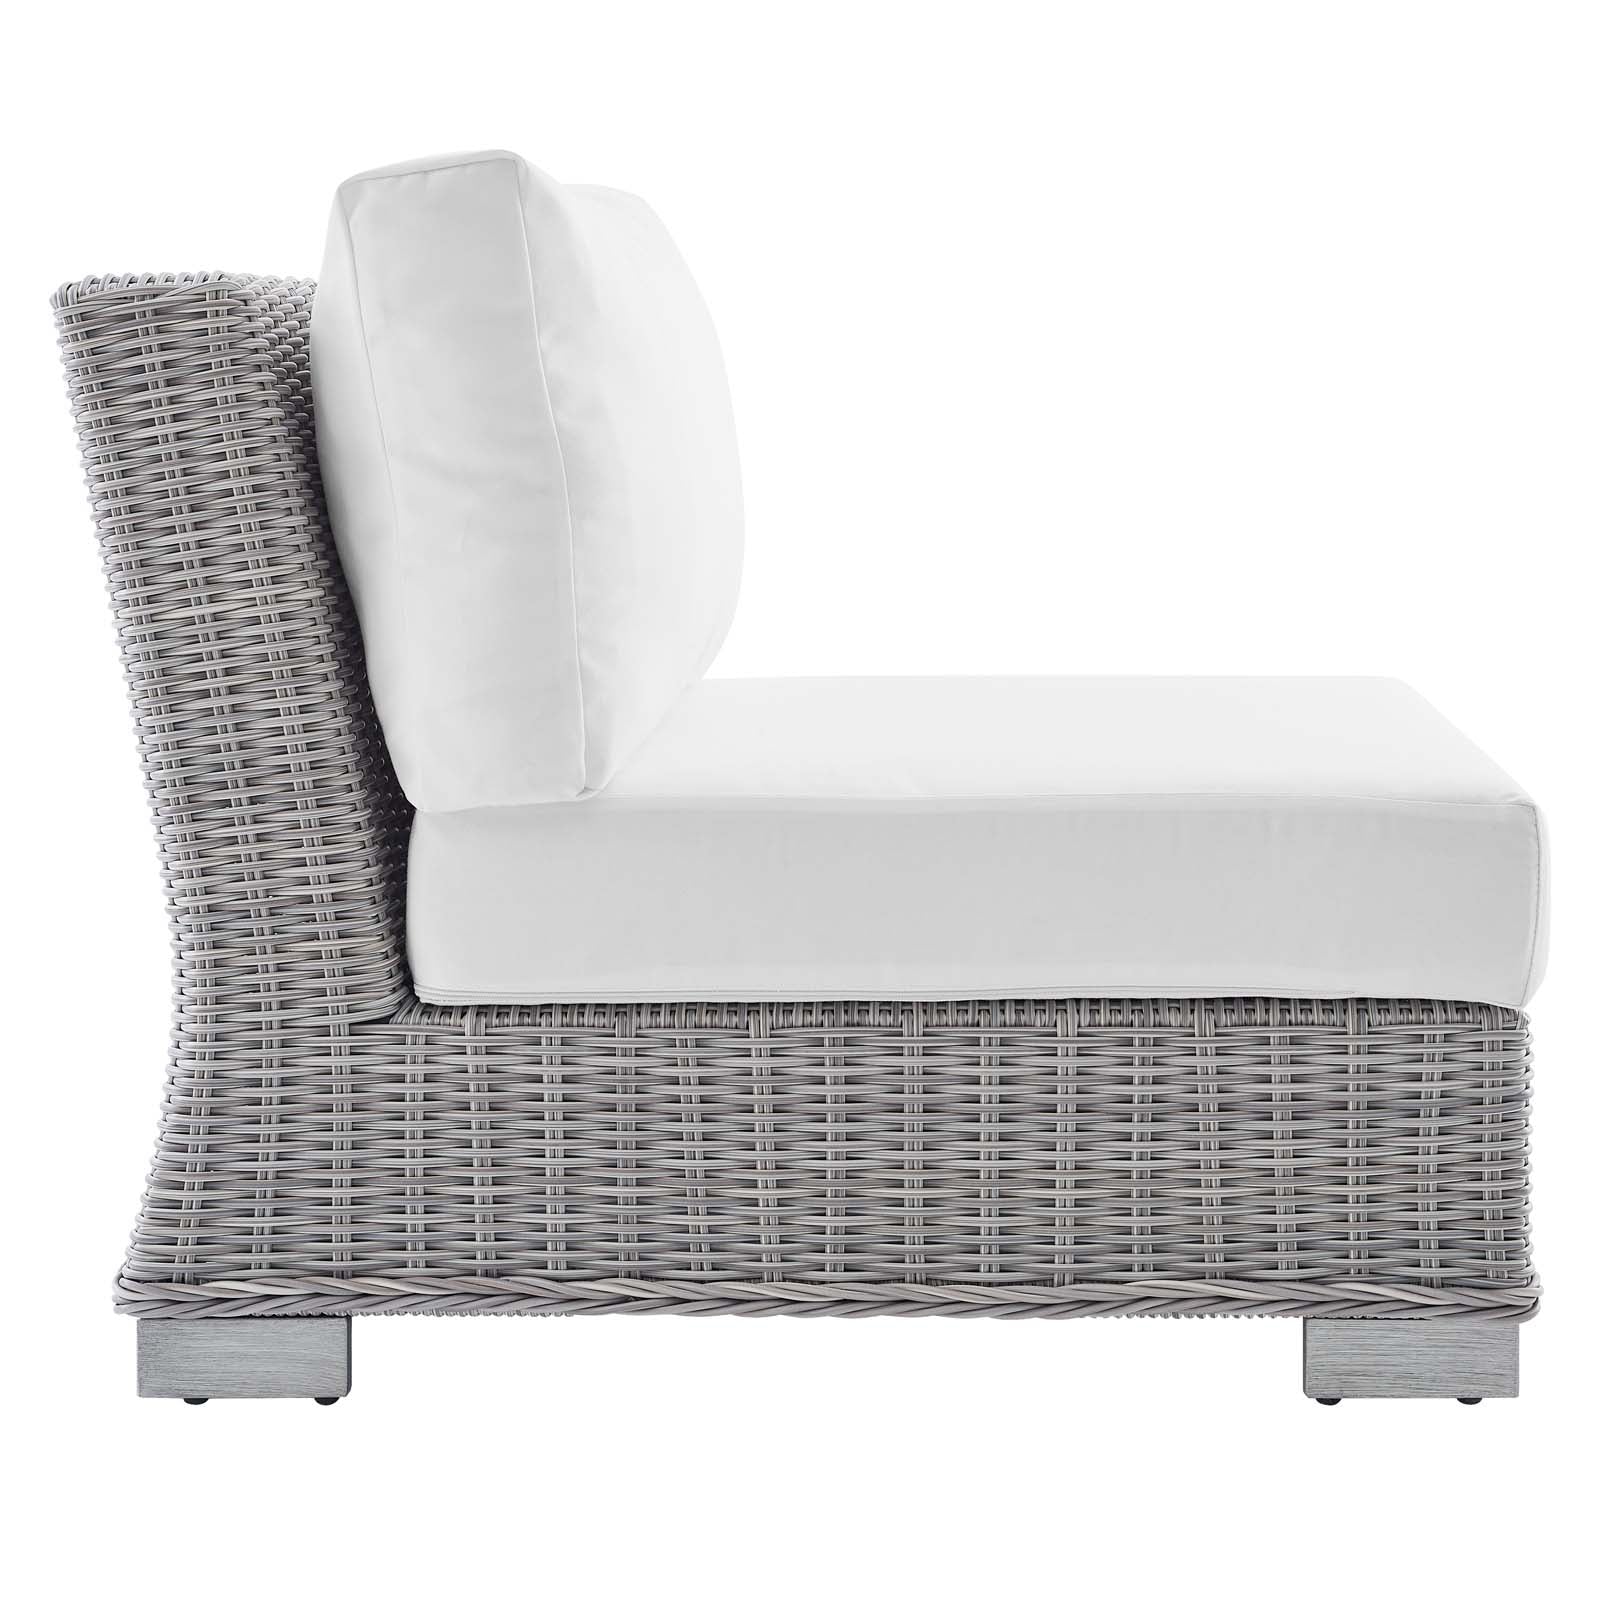 Modway Outdoor Chairs - Conway Sunbrella Outdoor Patio Wicker Rattan Armless Chair Light Gray White